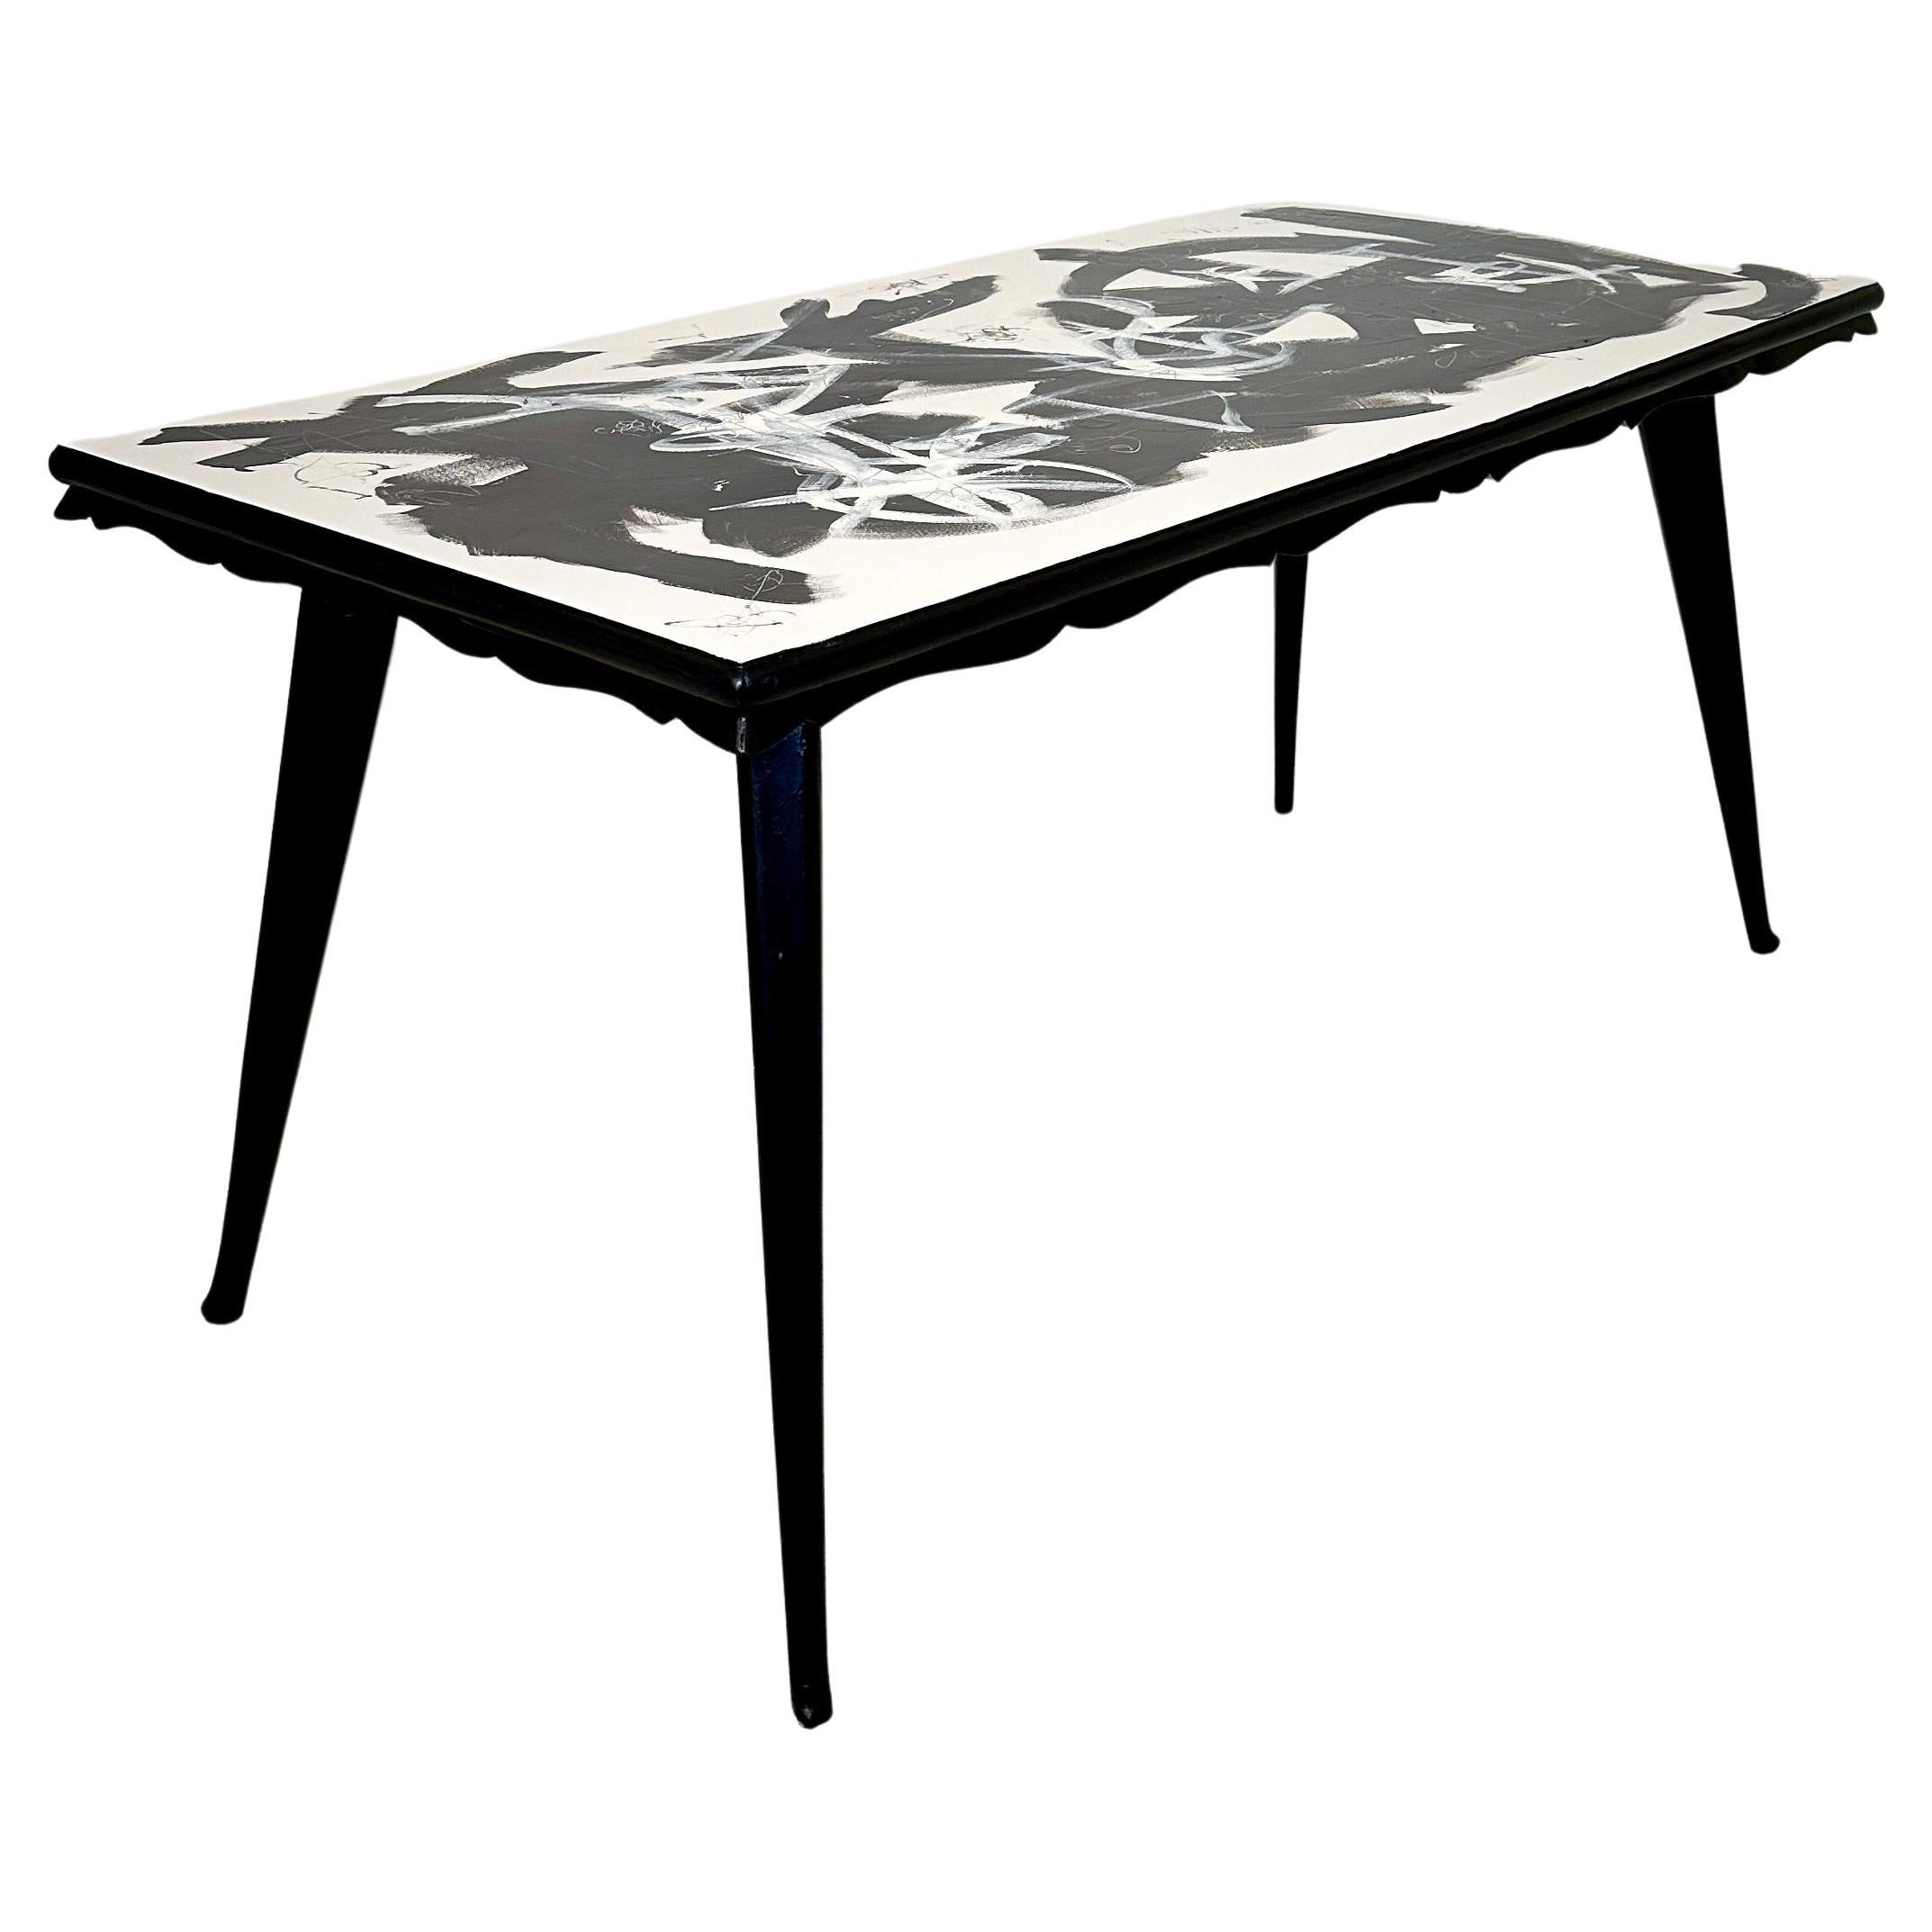 Contemporary Abstract Painted Dining Table in Black and White, 1950s Base